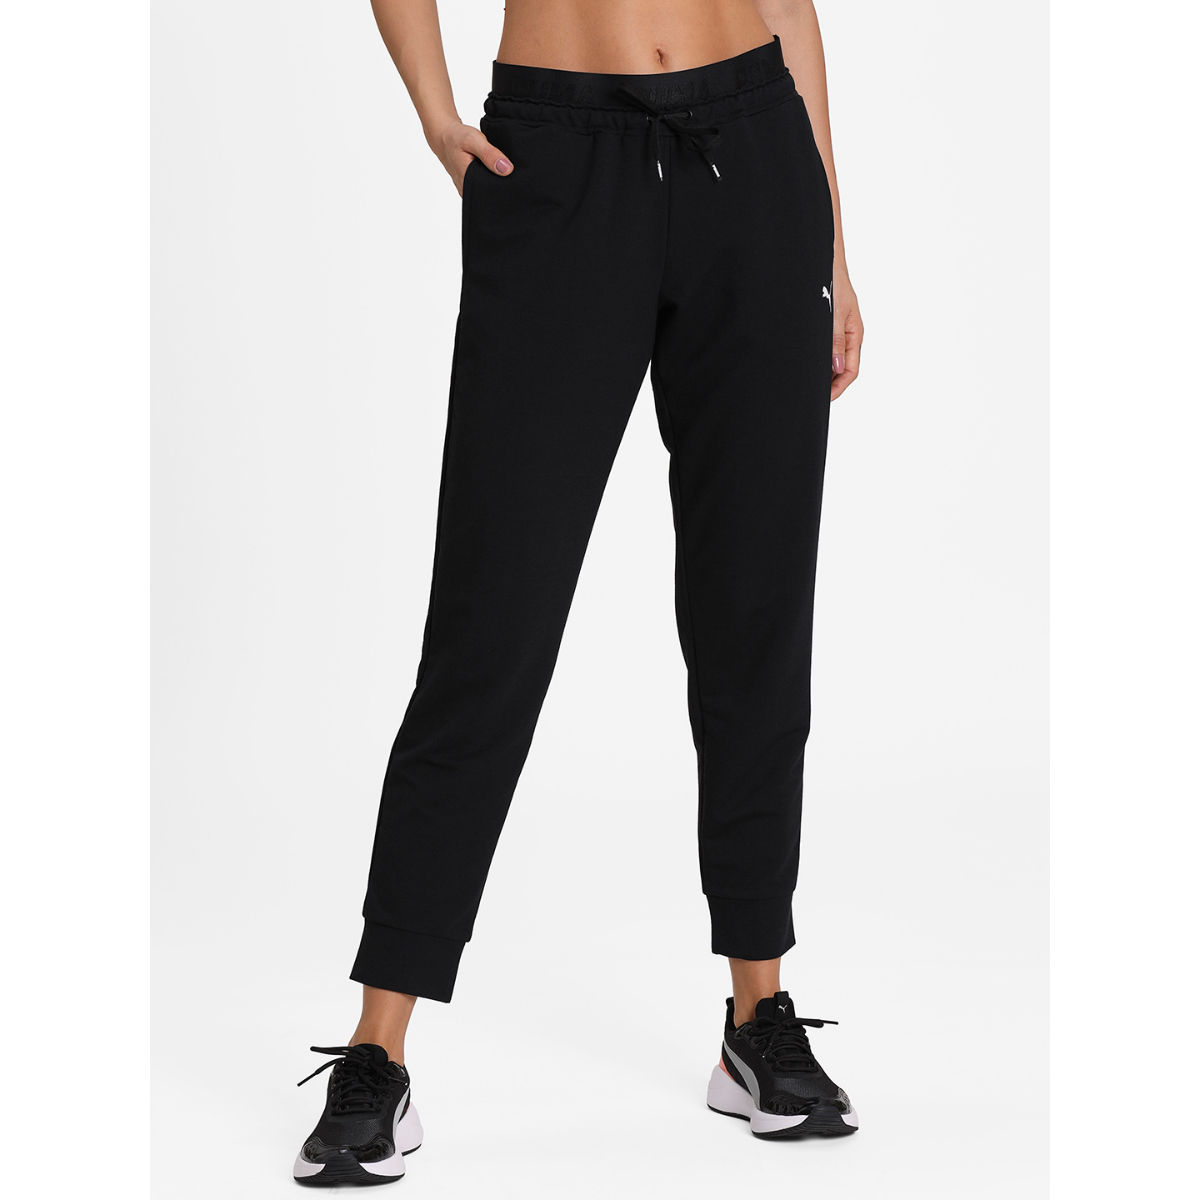 Buy PUMA Printed Cotton Slim Fit Women's Track Pants | Shoppers Stop